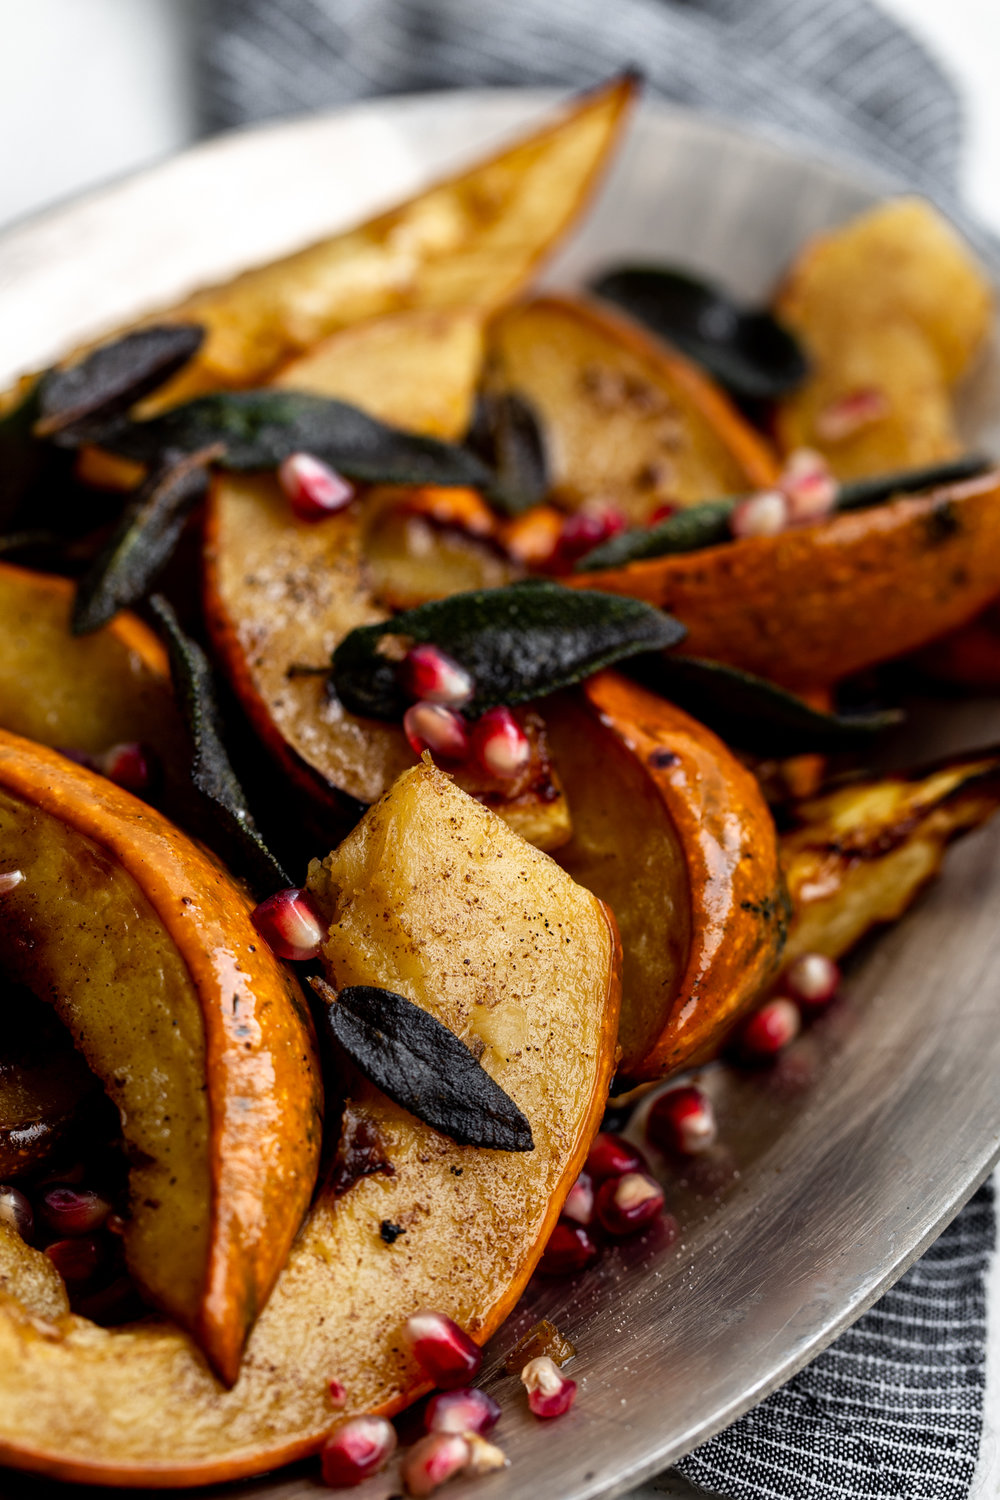 Roasted Acorn Squash with Sage thanksgiving side dish